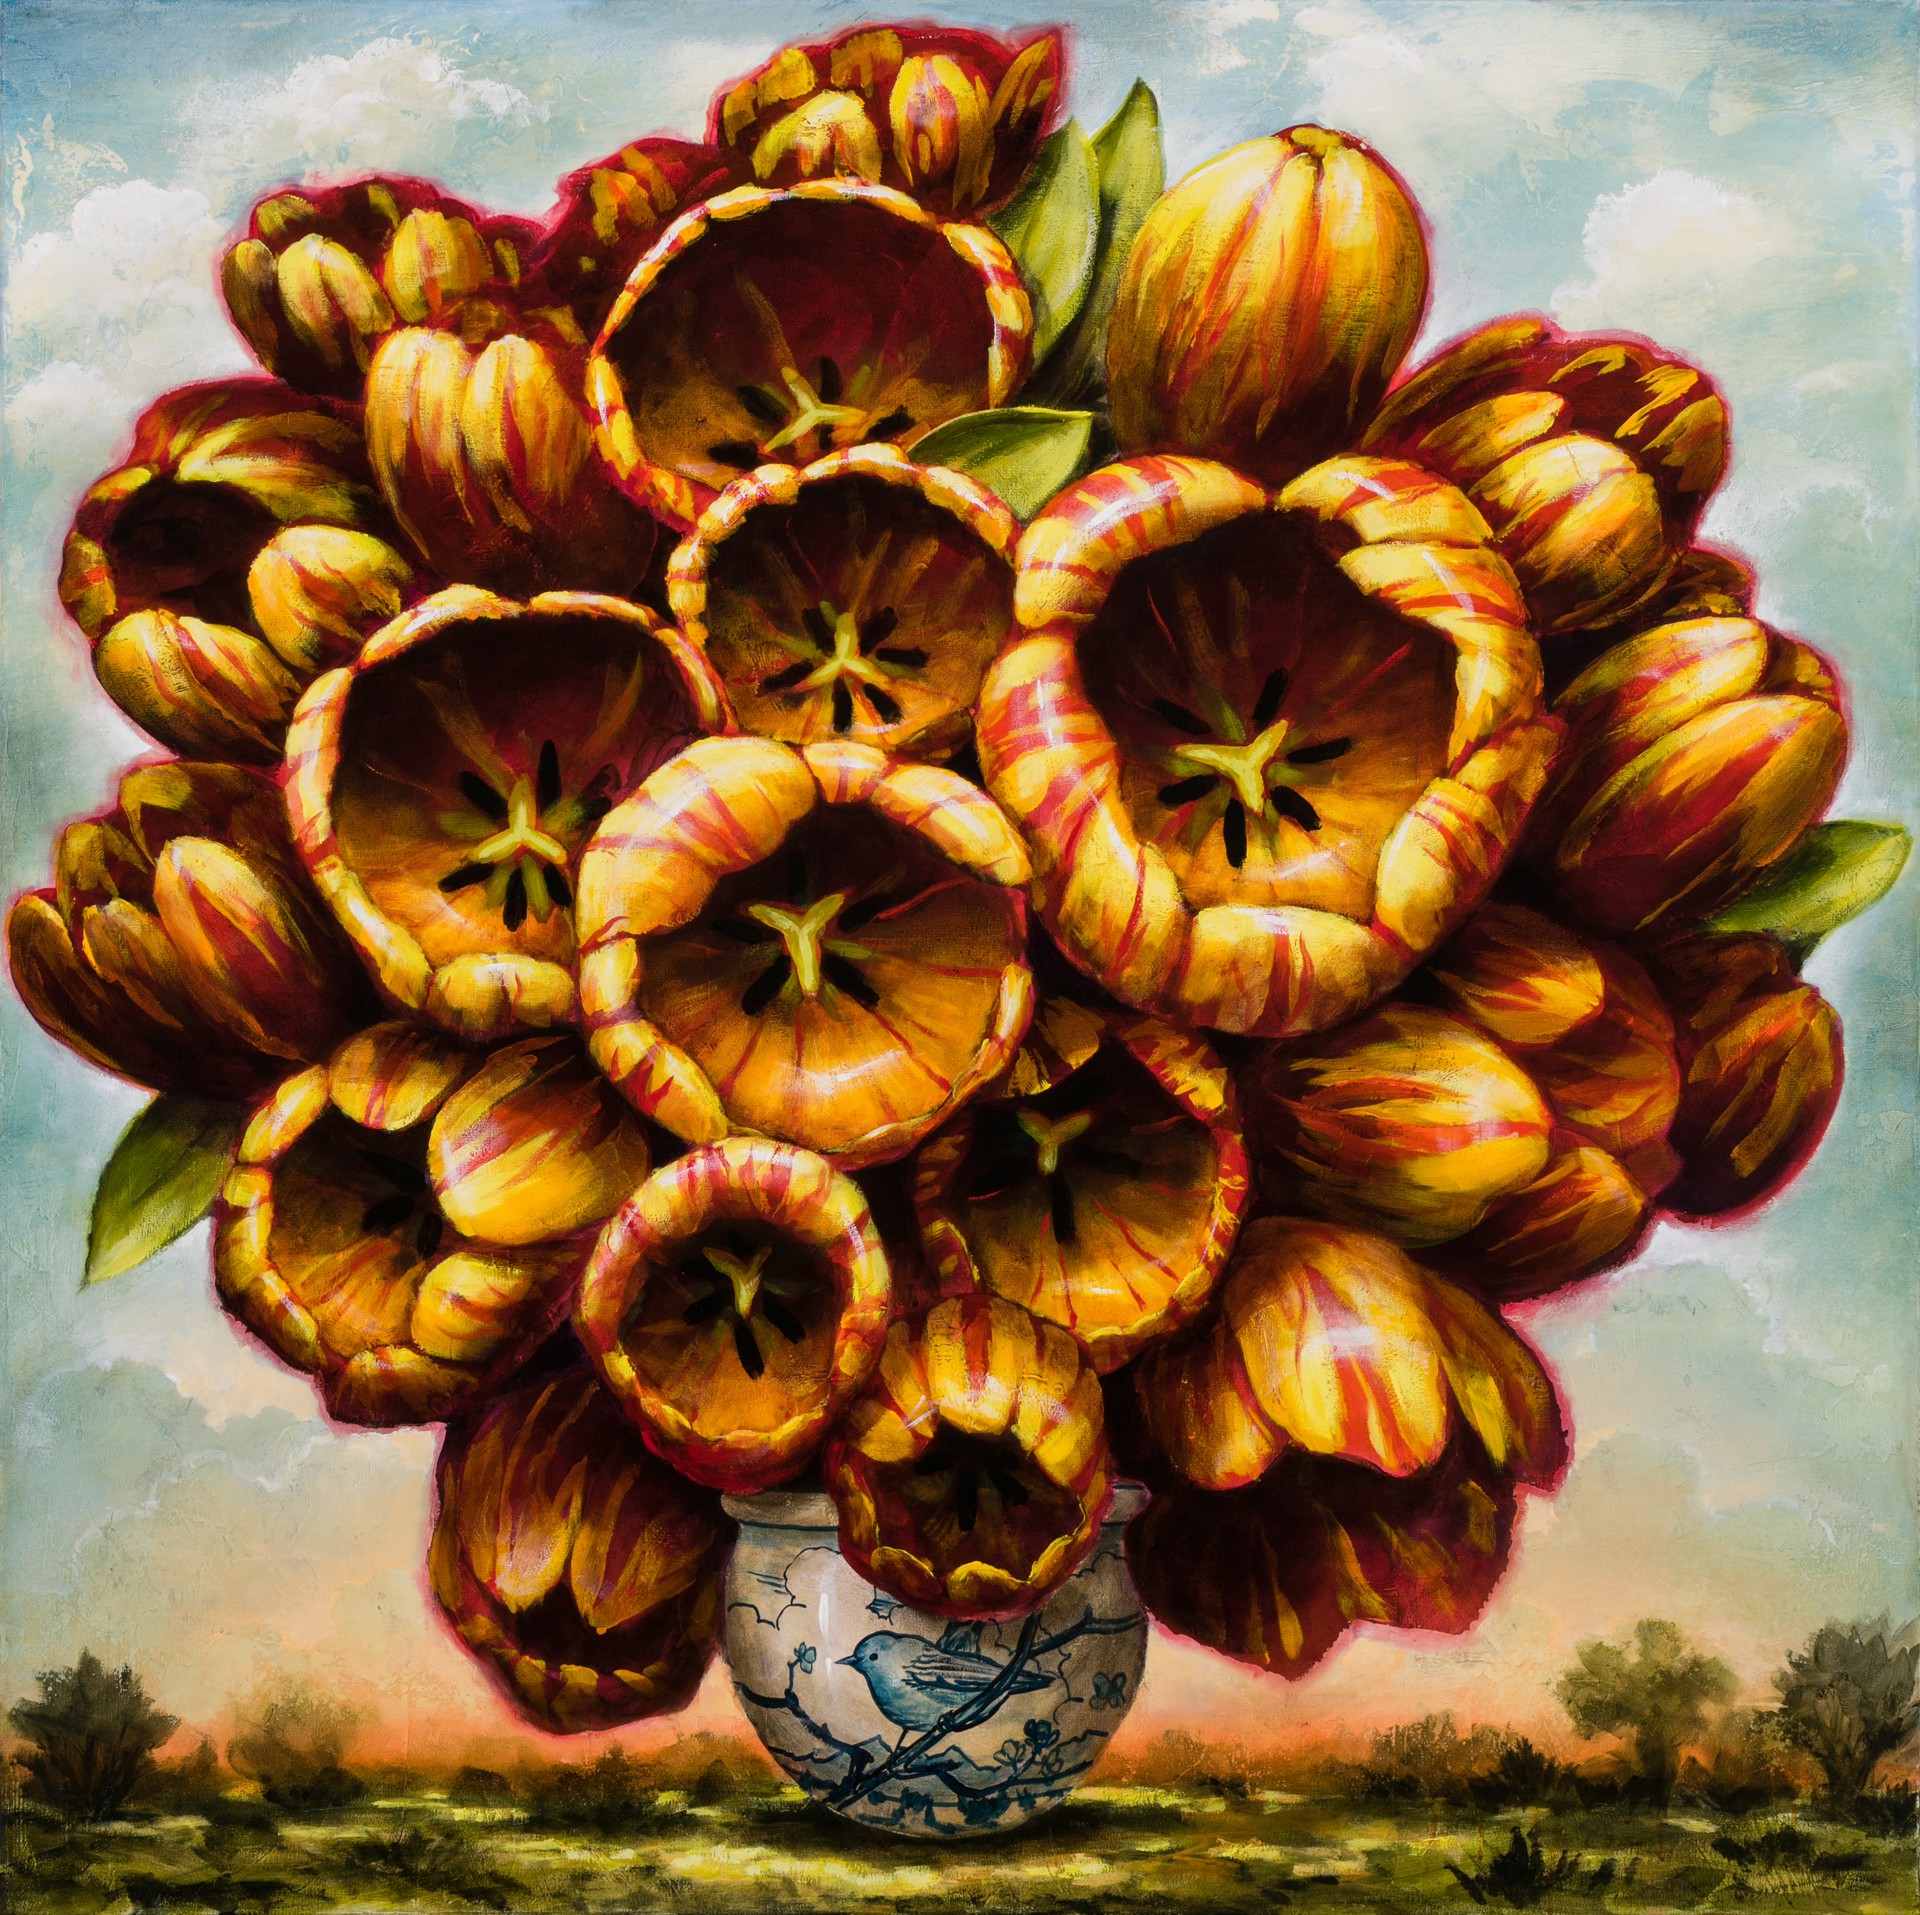 The Bonfire by Kevin Sloan